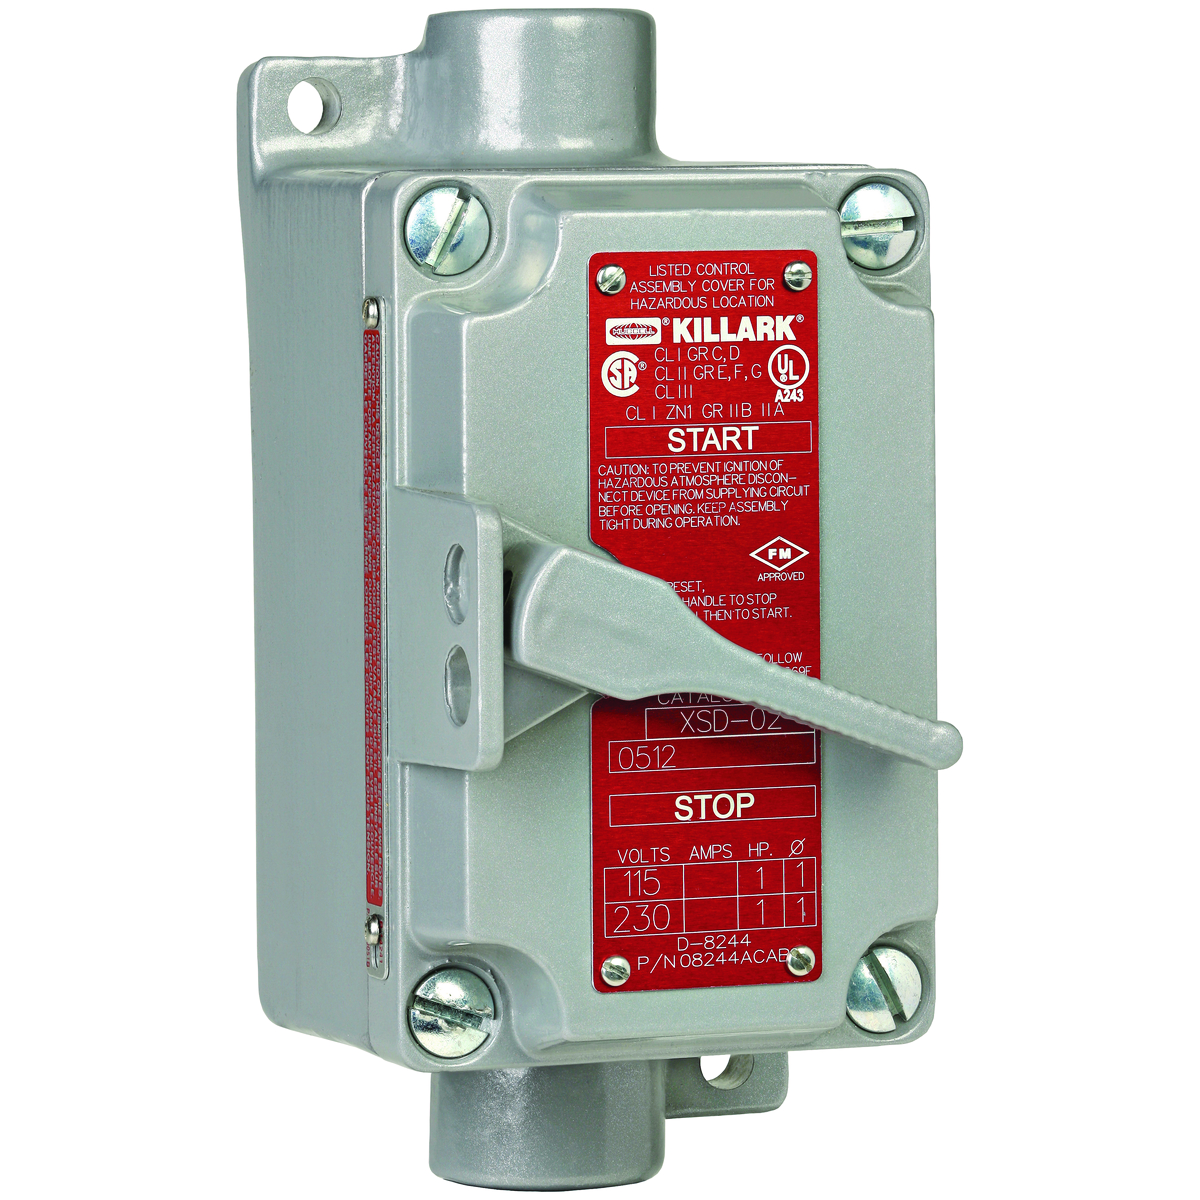 XSX SERIES - ALUMINUM DEAD-END SINGLE GANG 2-POLE, SINGLE PHASE MANUALMOTOR STARTING SWITCH UNIT - WITHOUT OVERLOAD PROTECTION - HUB SIZE 1/2INCH